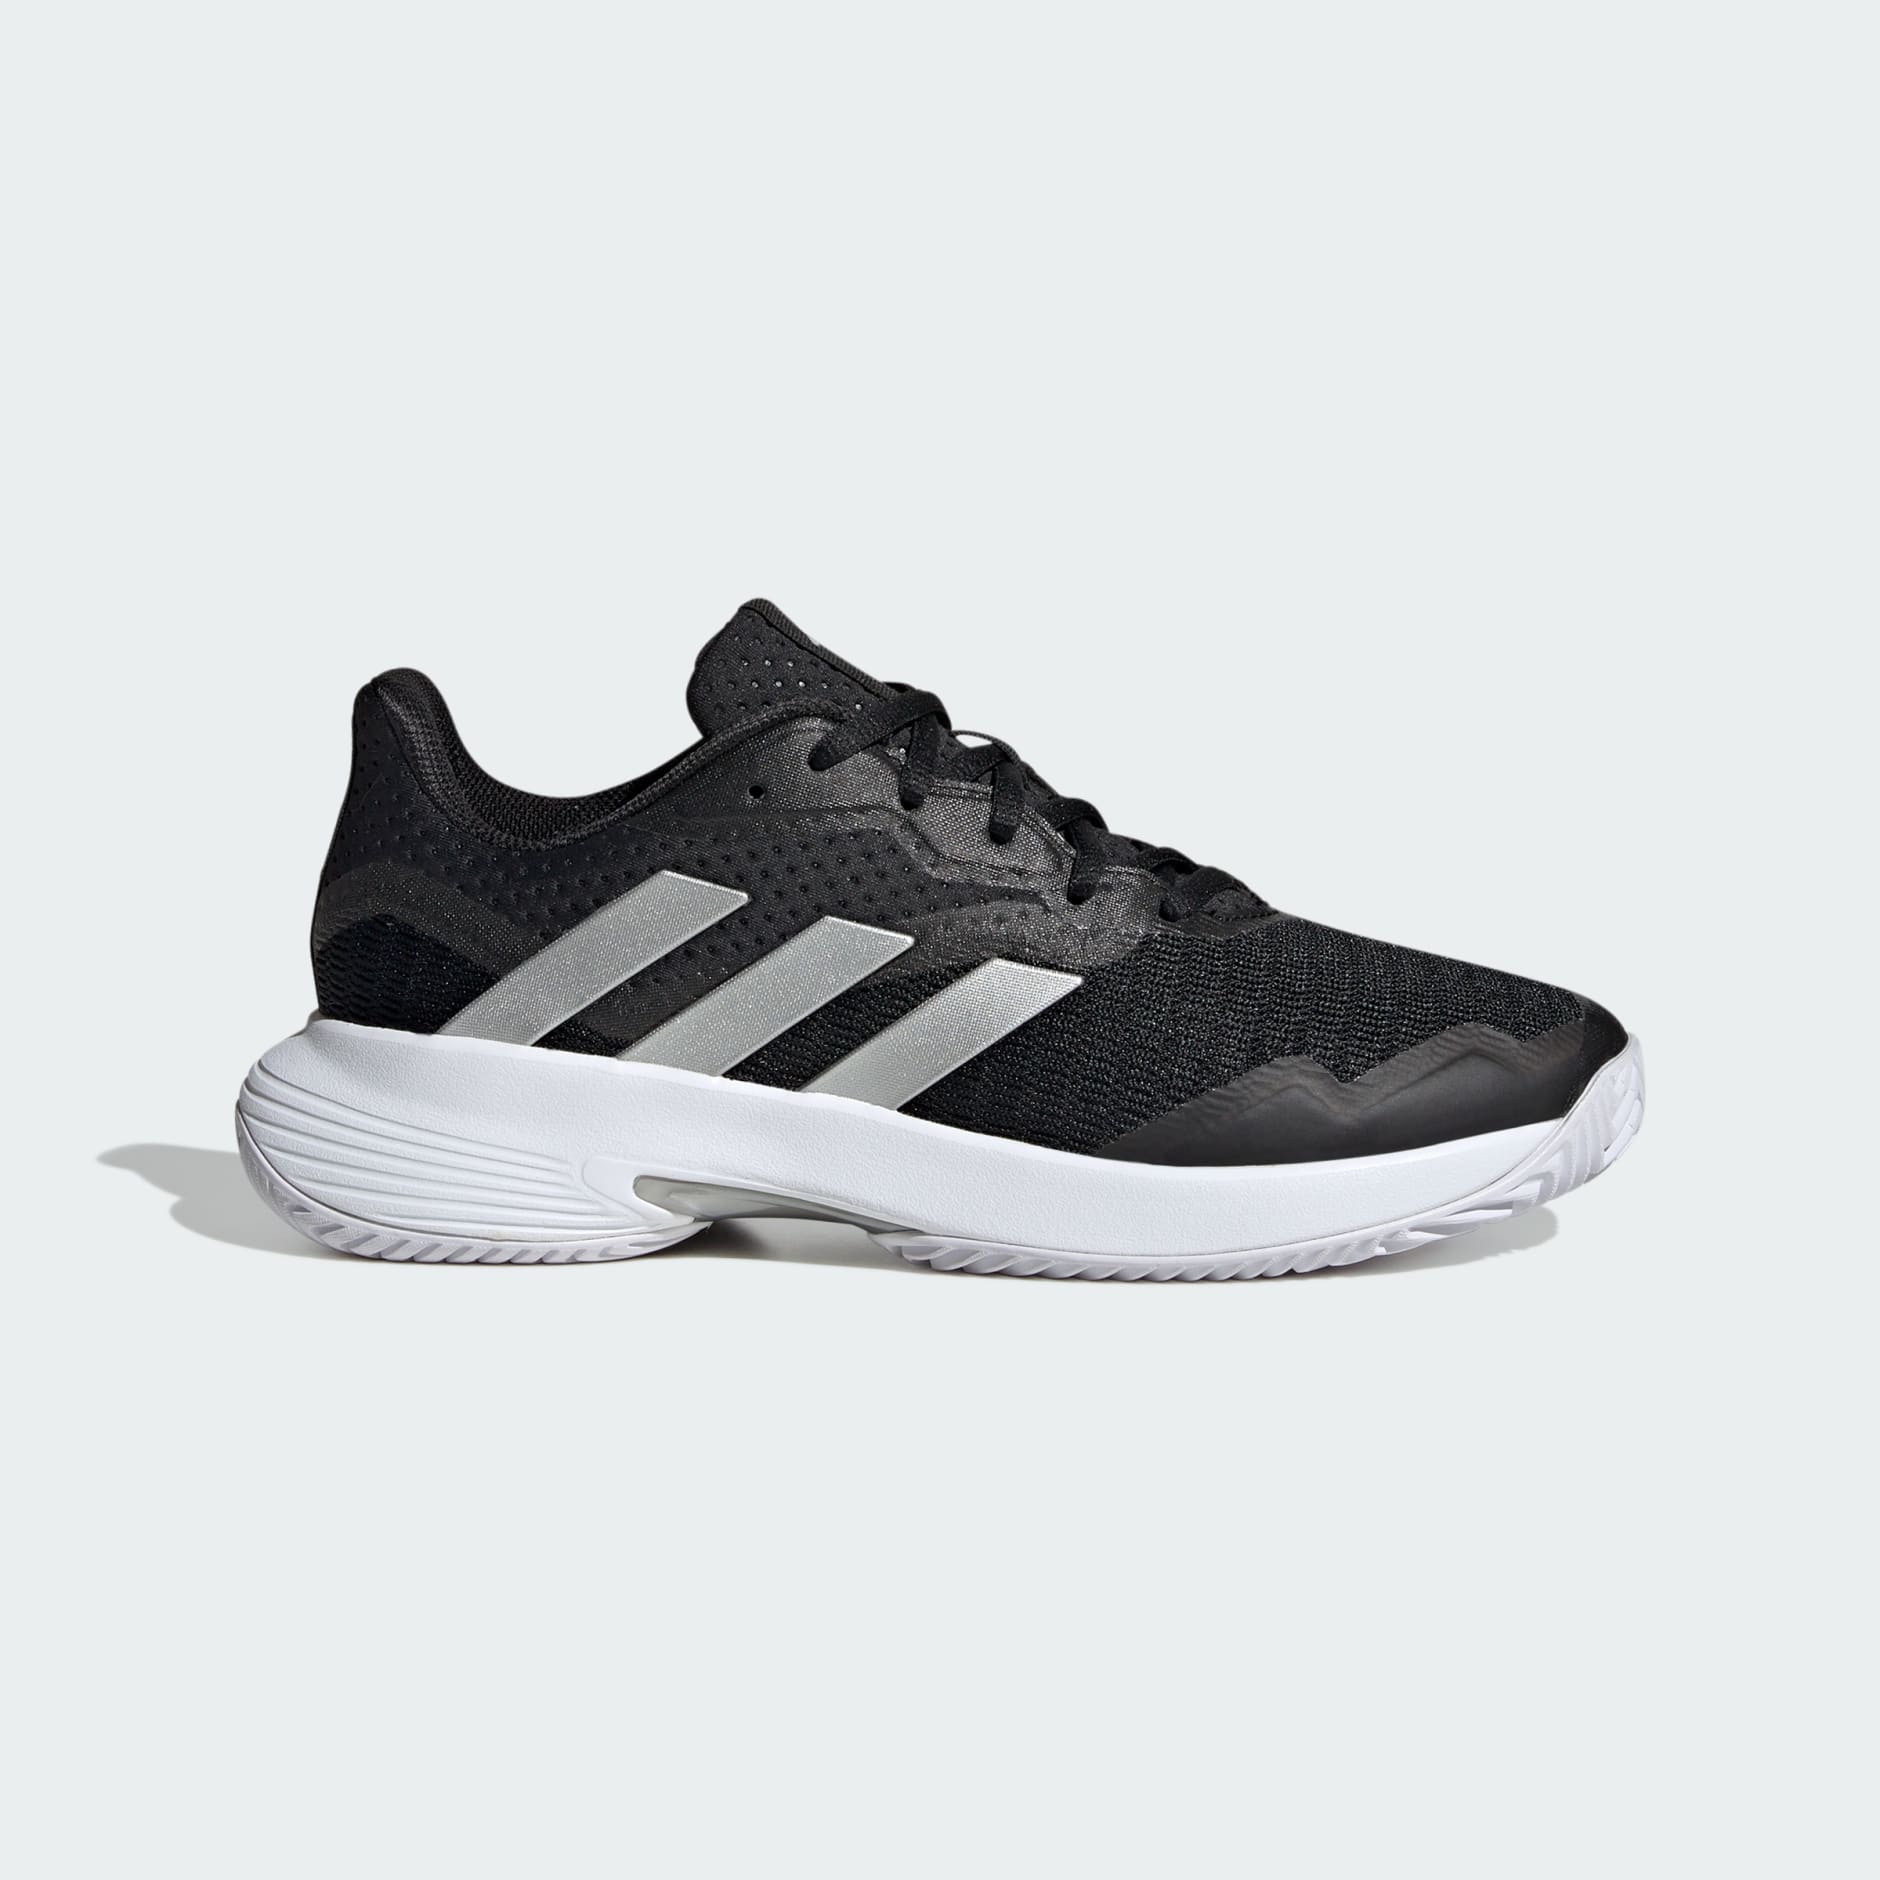 Shoes - CourtJam Control Tennis Shoes - Black | adidas South Africa